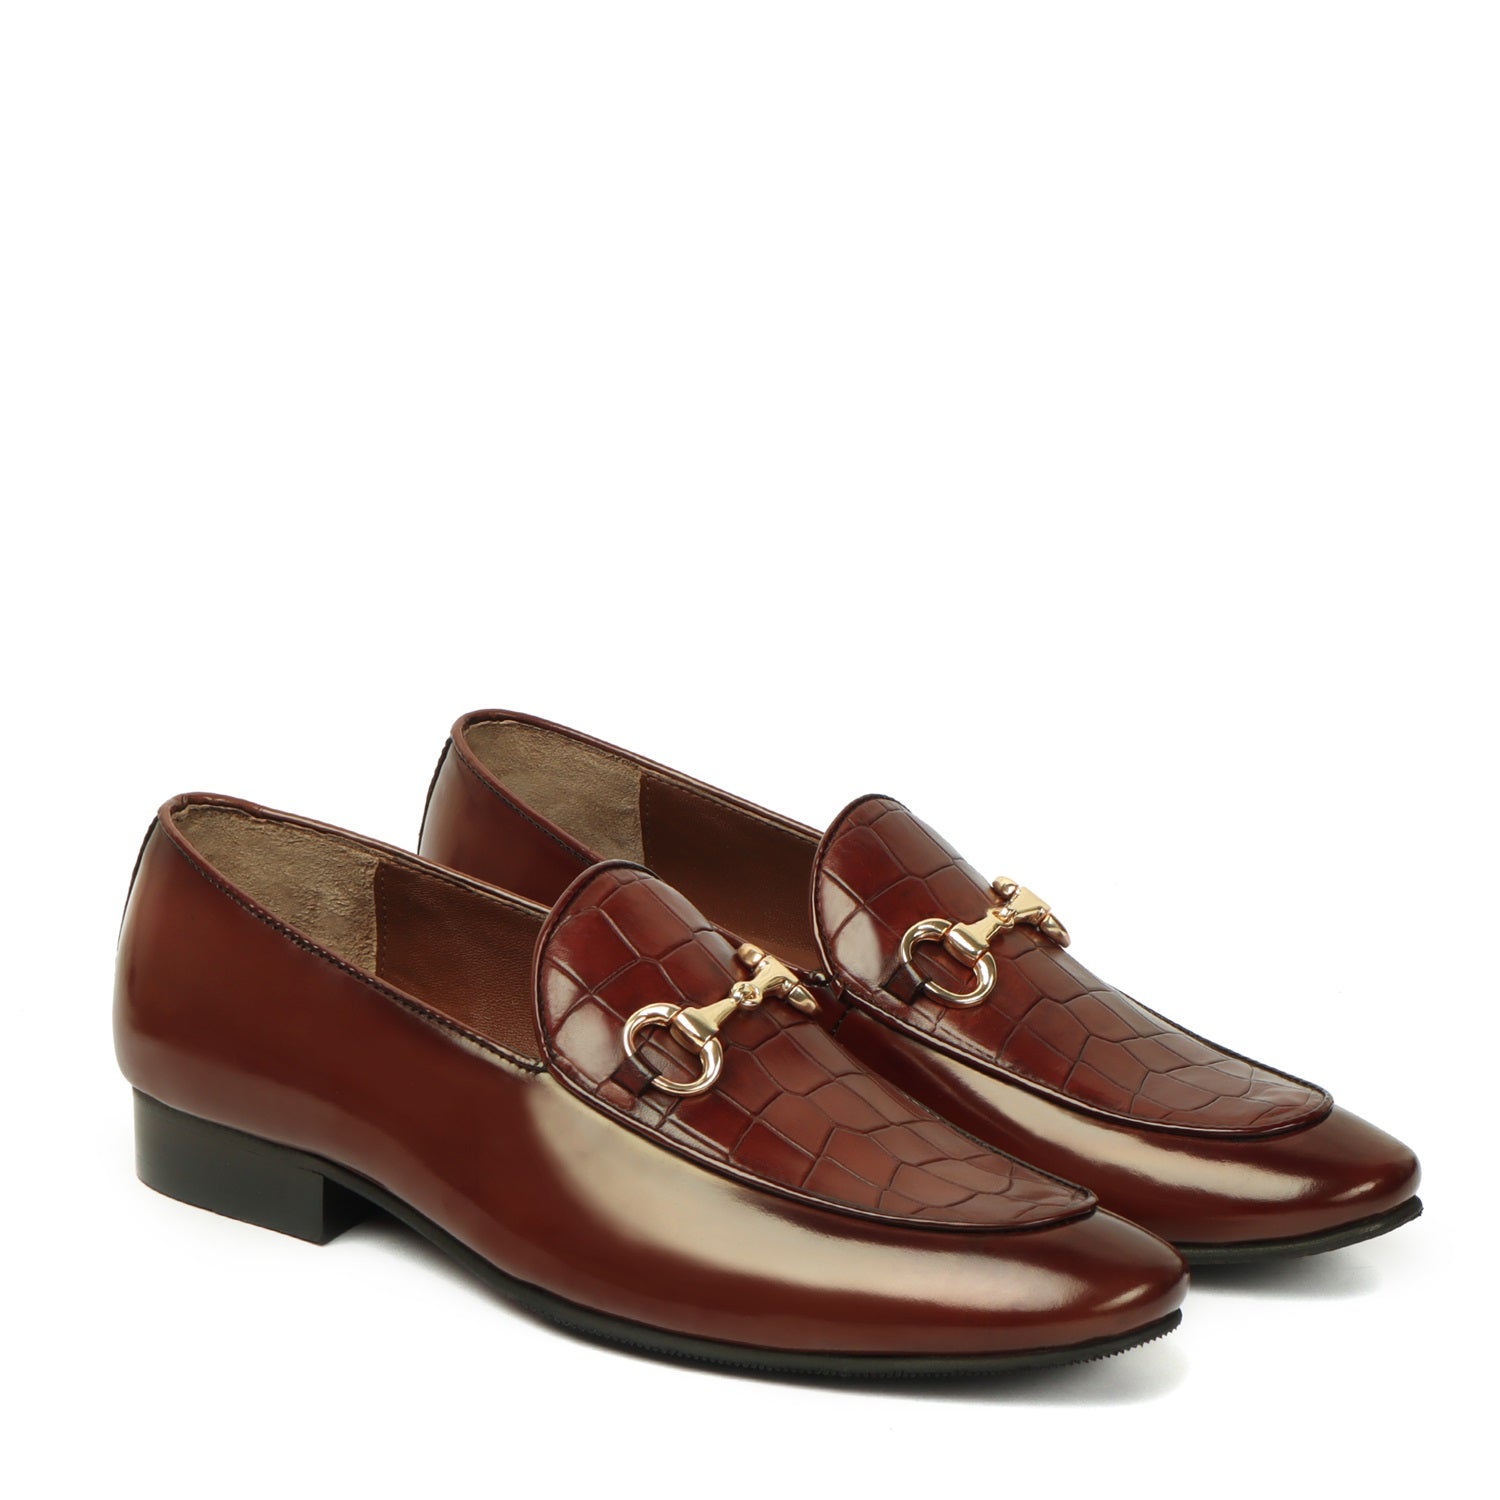 Dark Brown Patent Loafers with Deep Cut Croco Leather at Vamp